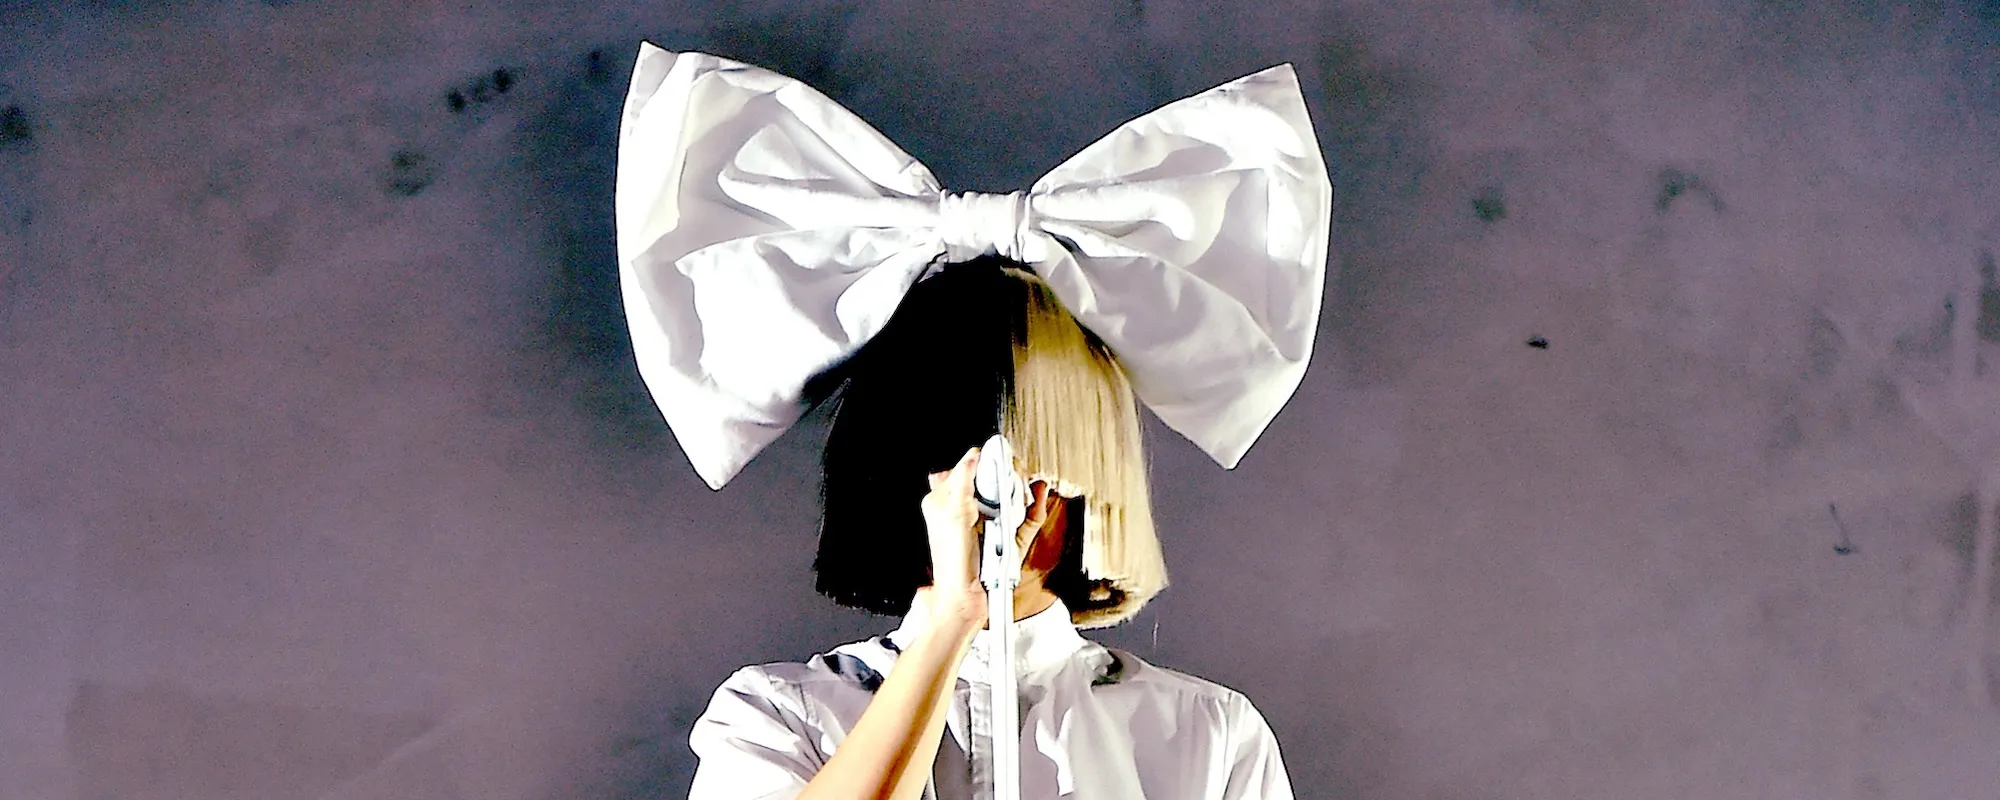 From “Cheap Thrills” to “Dance Alone”: 5 of Sia’s Best Collaborations